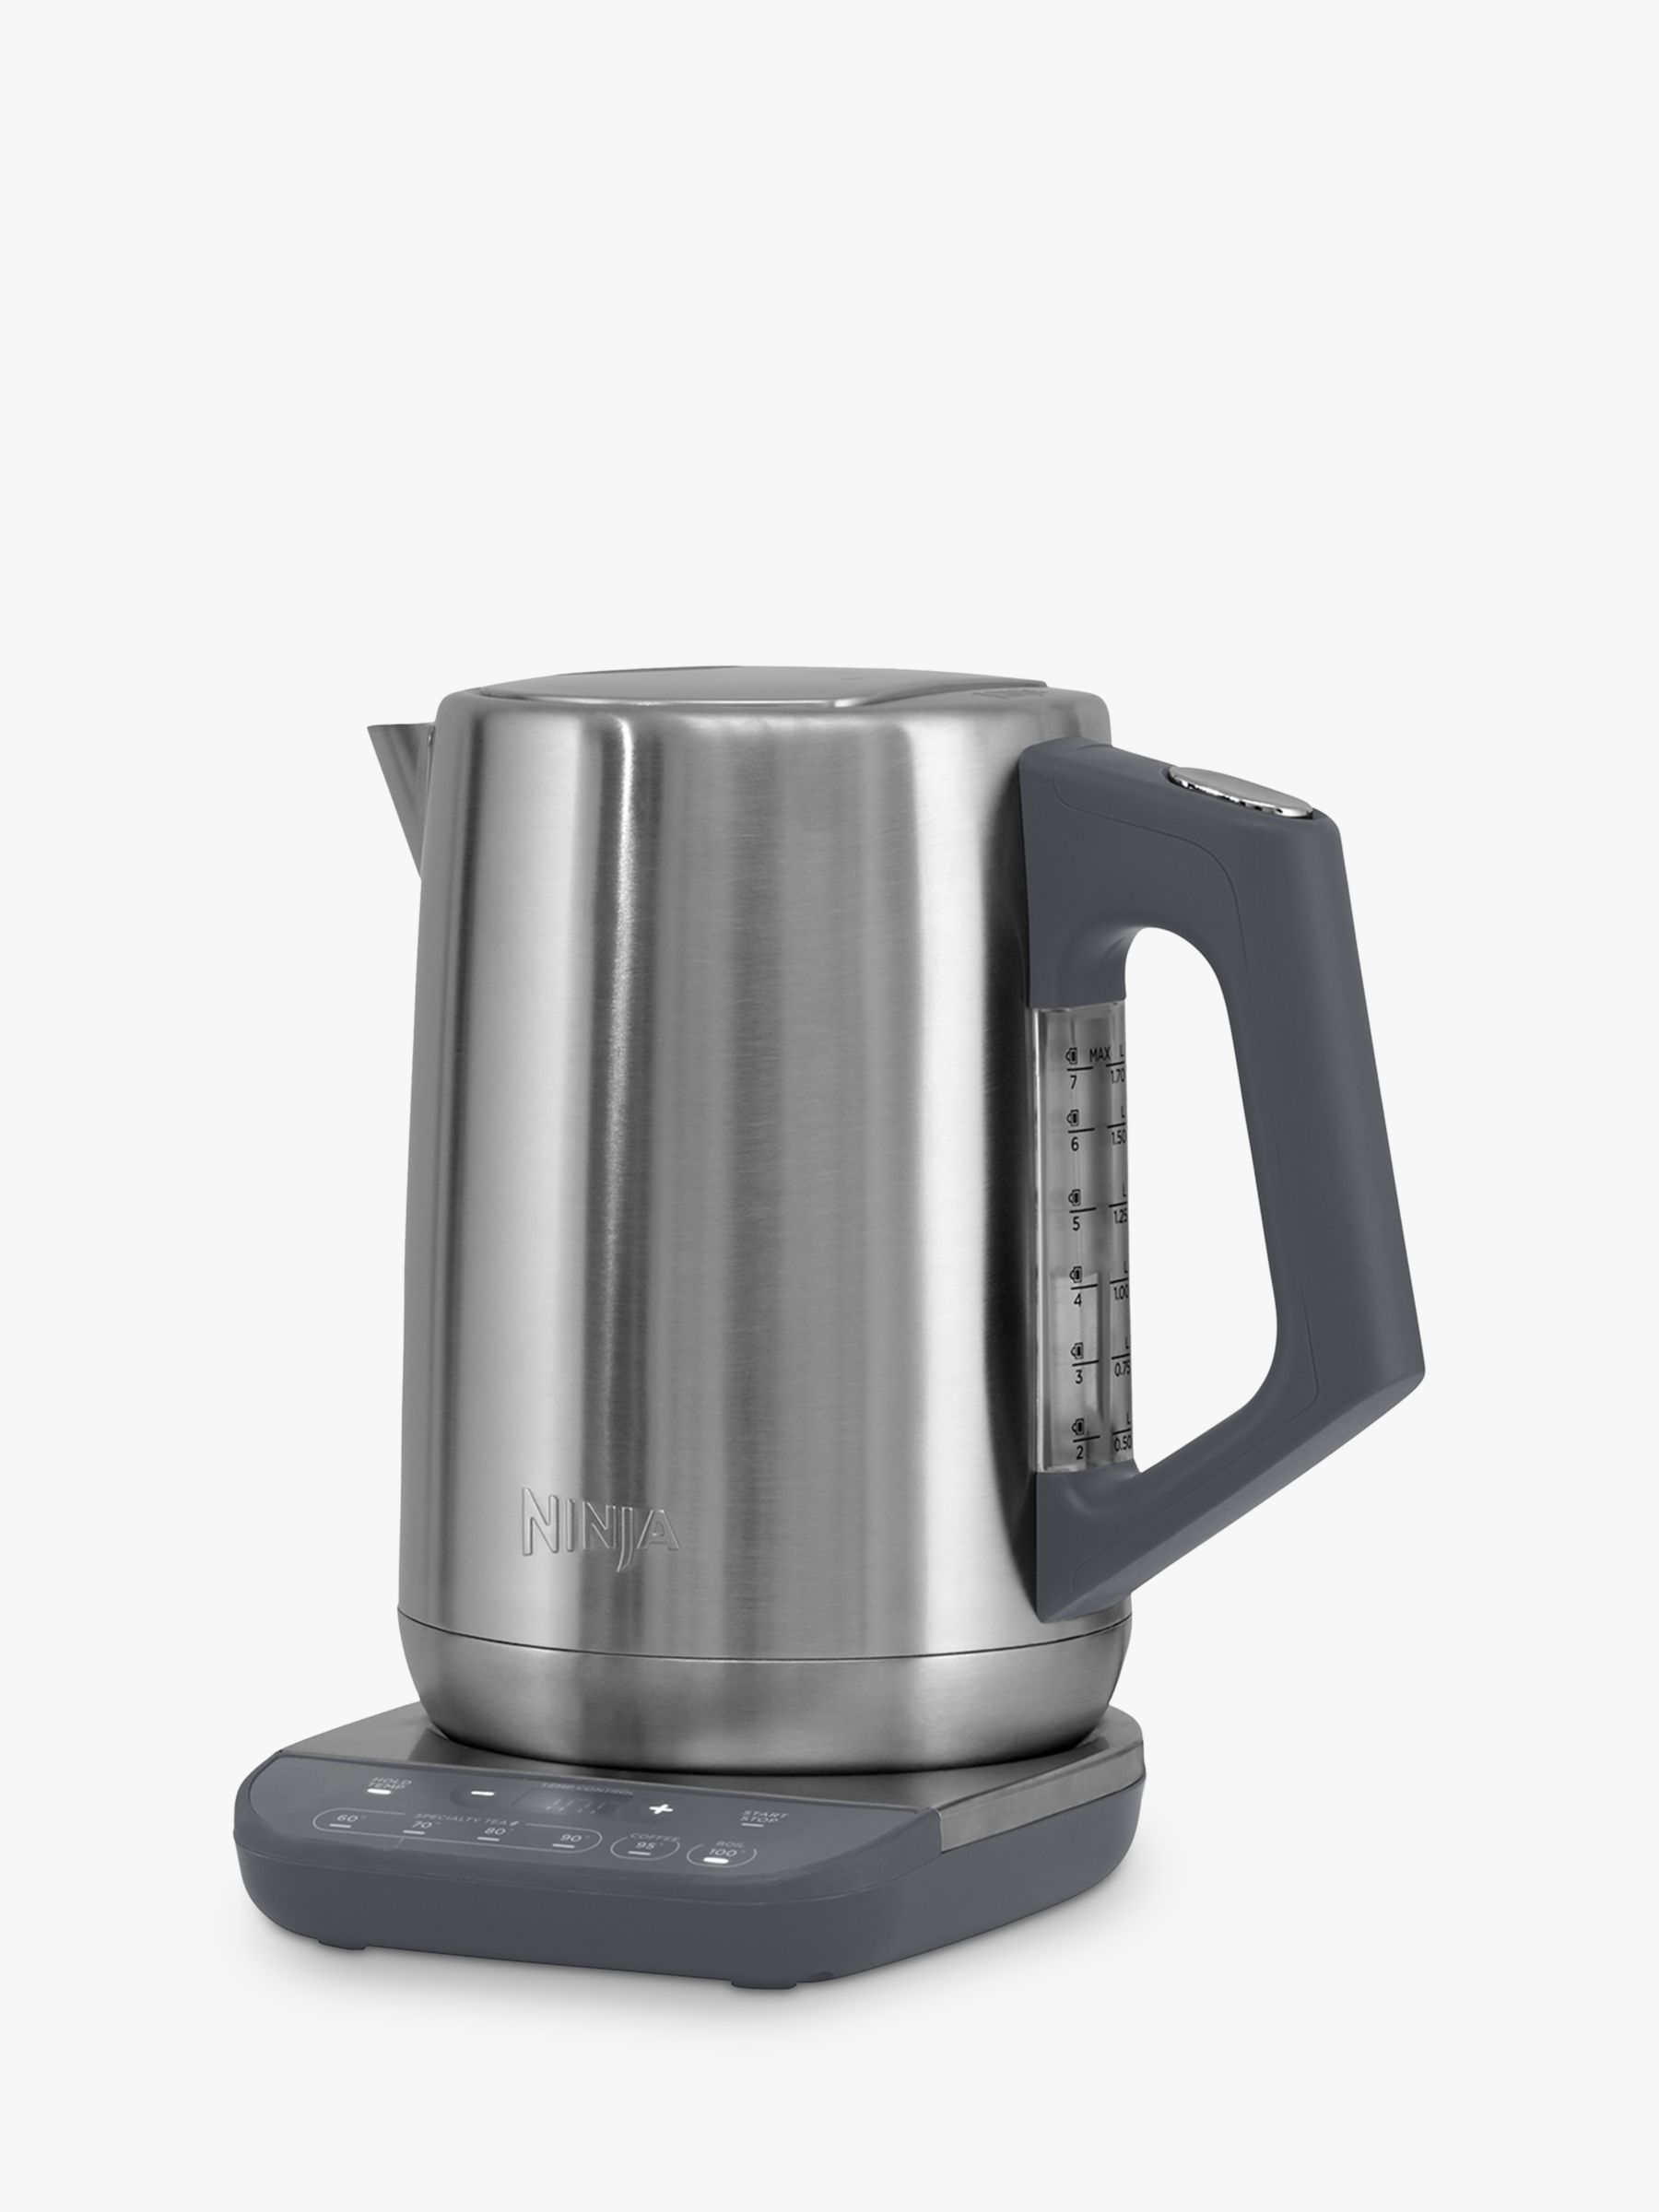 Ninja Perfect Temperature Kettle review: Too hot to handle